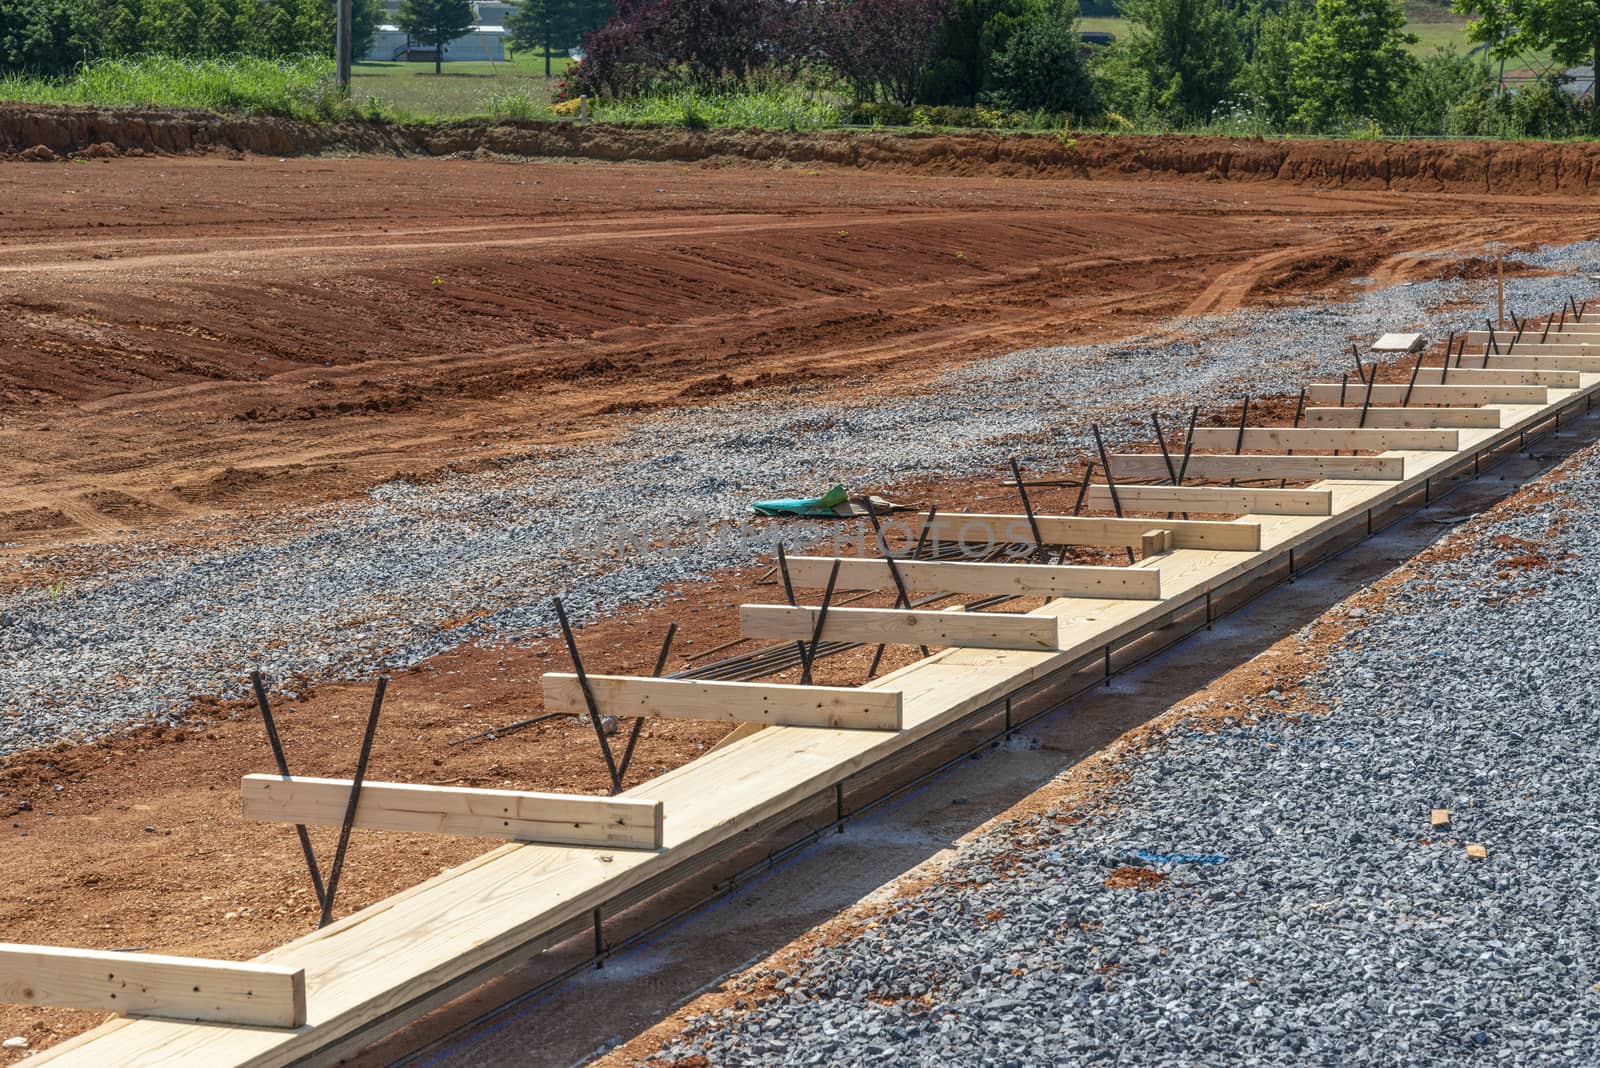 Horizontal shot of a construction site with a wooden frame ready for a concrete slab to be poured.